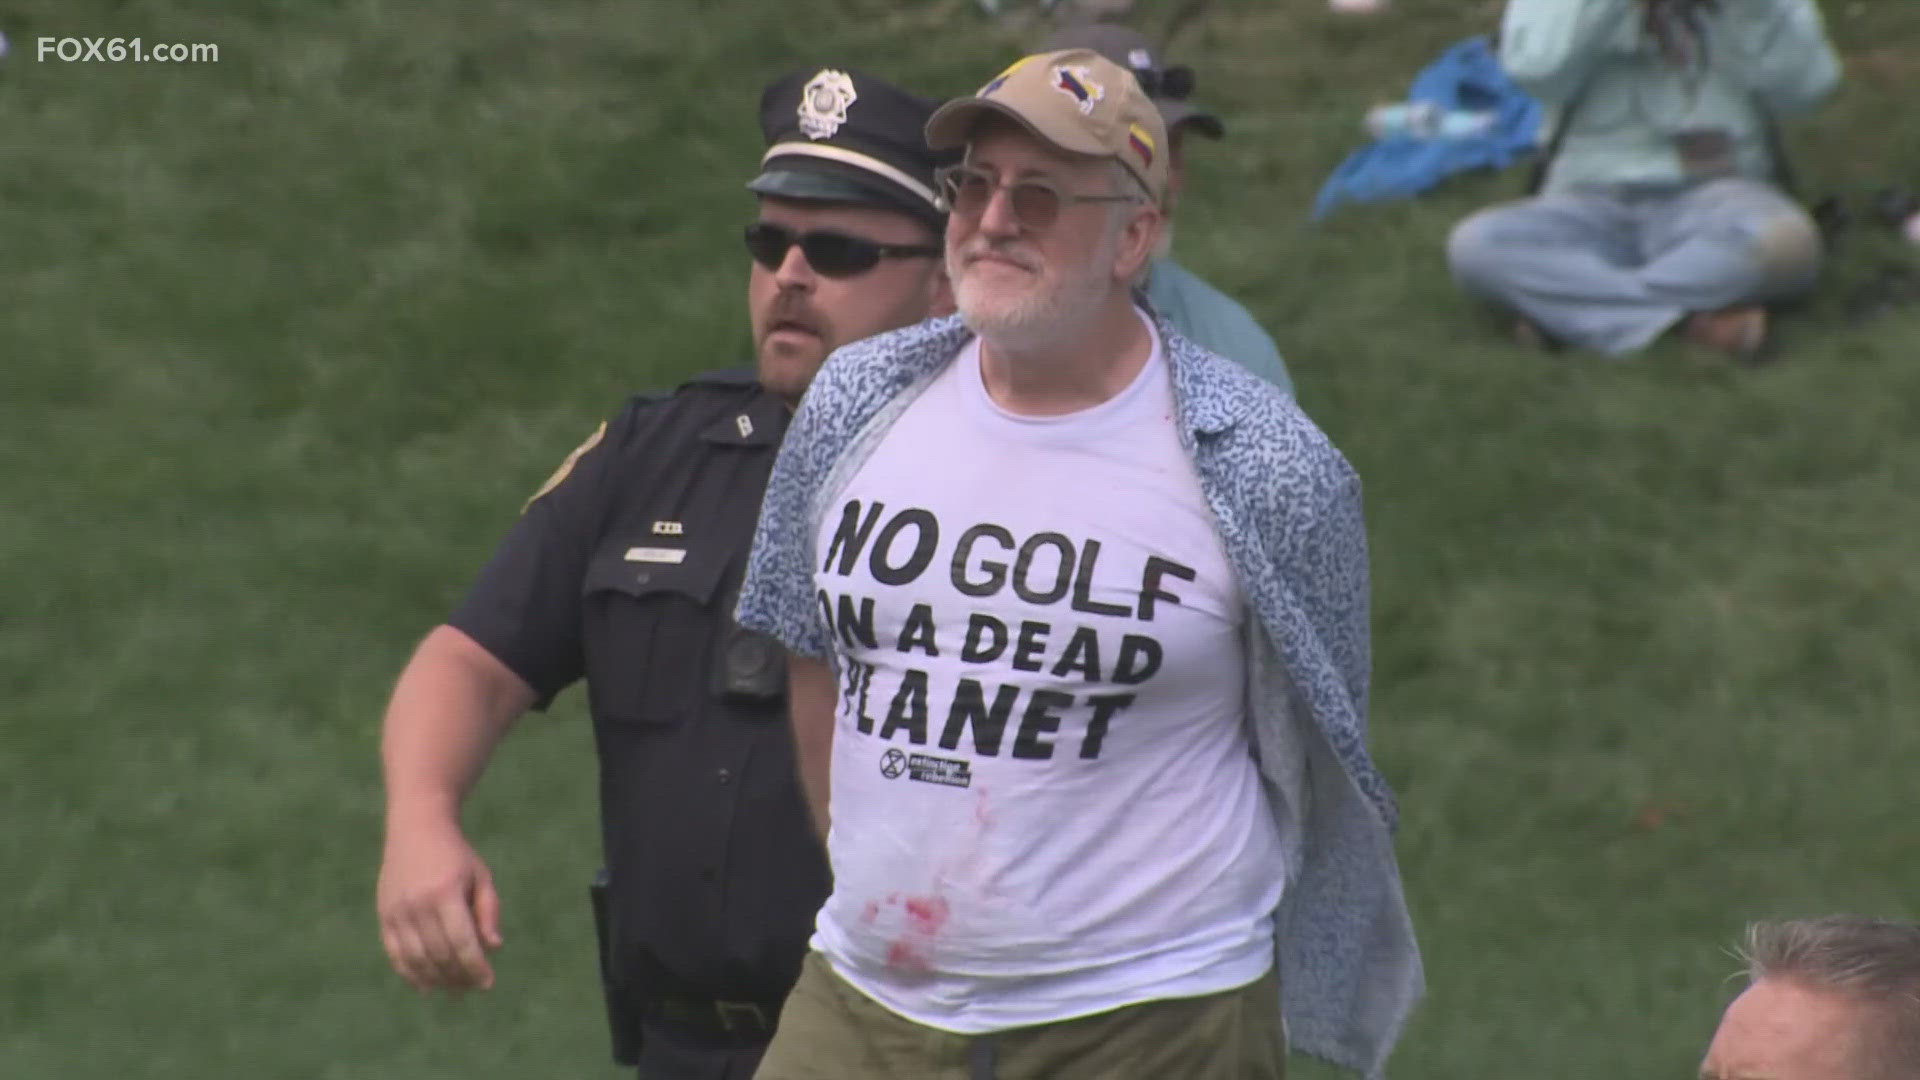 Six people were arrested for storming 18 as Kim and Scheffler were battling for the Travelers Championship title.